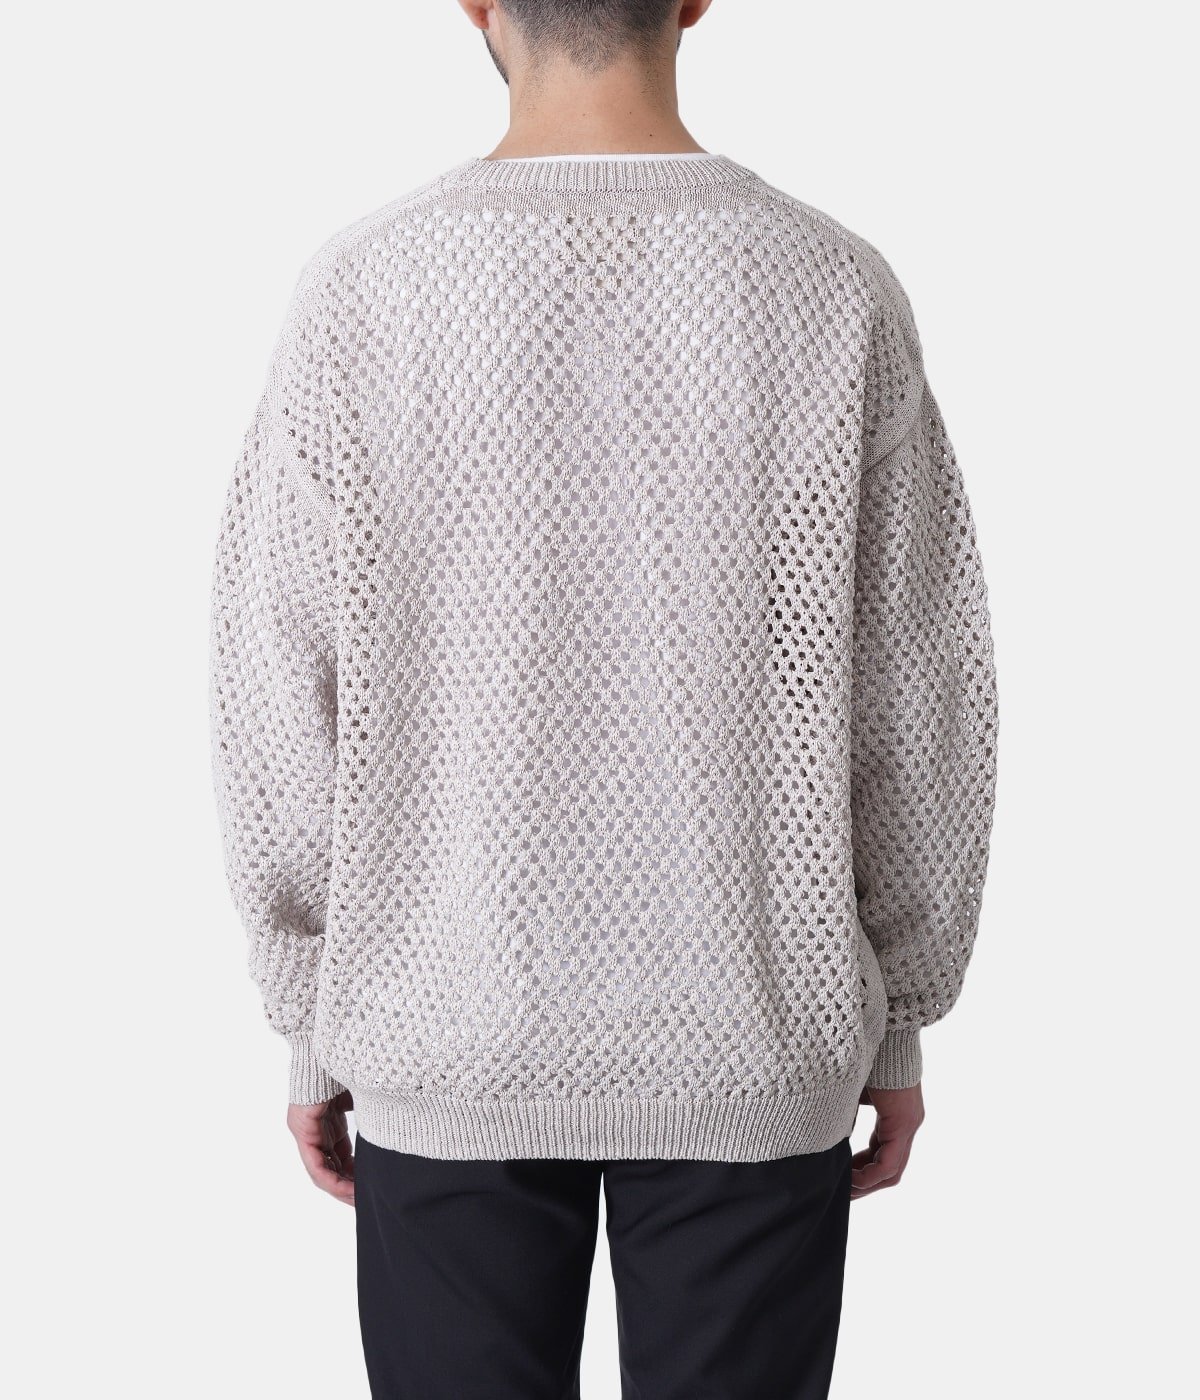 【ONLY ARK】別注 MESHED KNIT CREWNECK